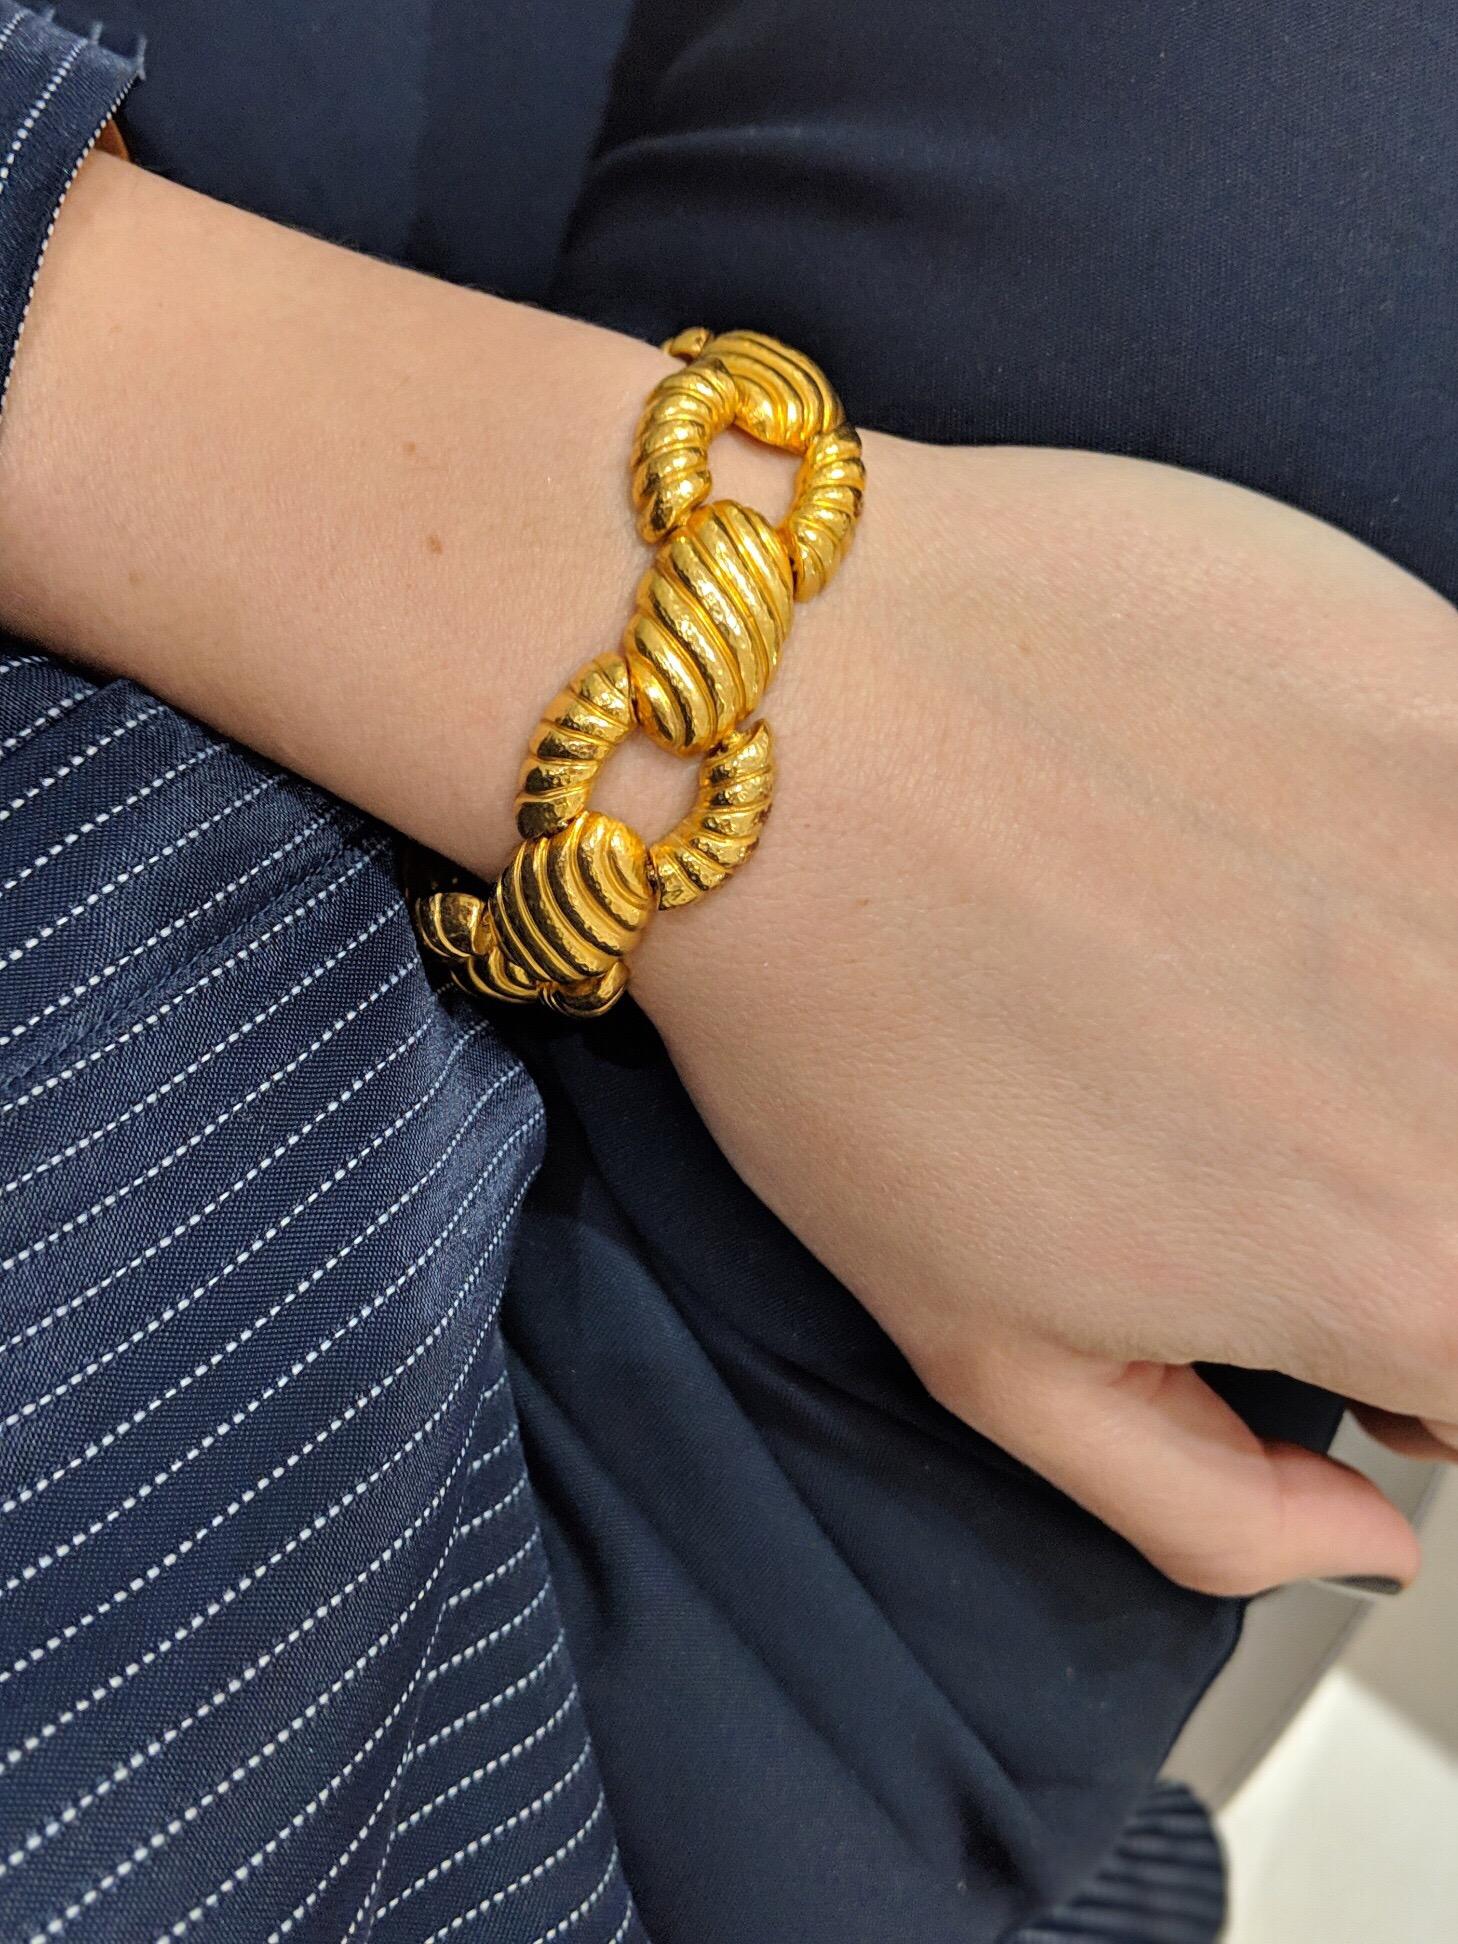 This  beautiful  bracelet is designed by Zolotas of Athens, Greece. Founded in 1895 the company merges Greek heritage with modern style to create these timeless pieces which have since been coveted by both Royals and Actresses.
Composed of 22 karat